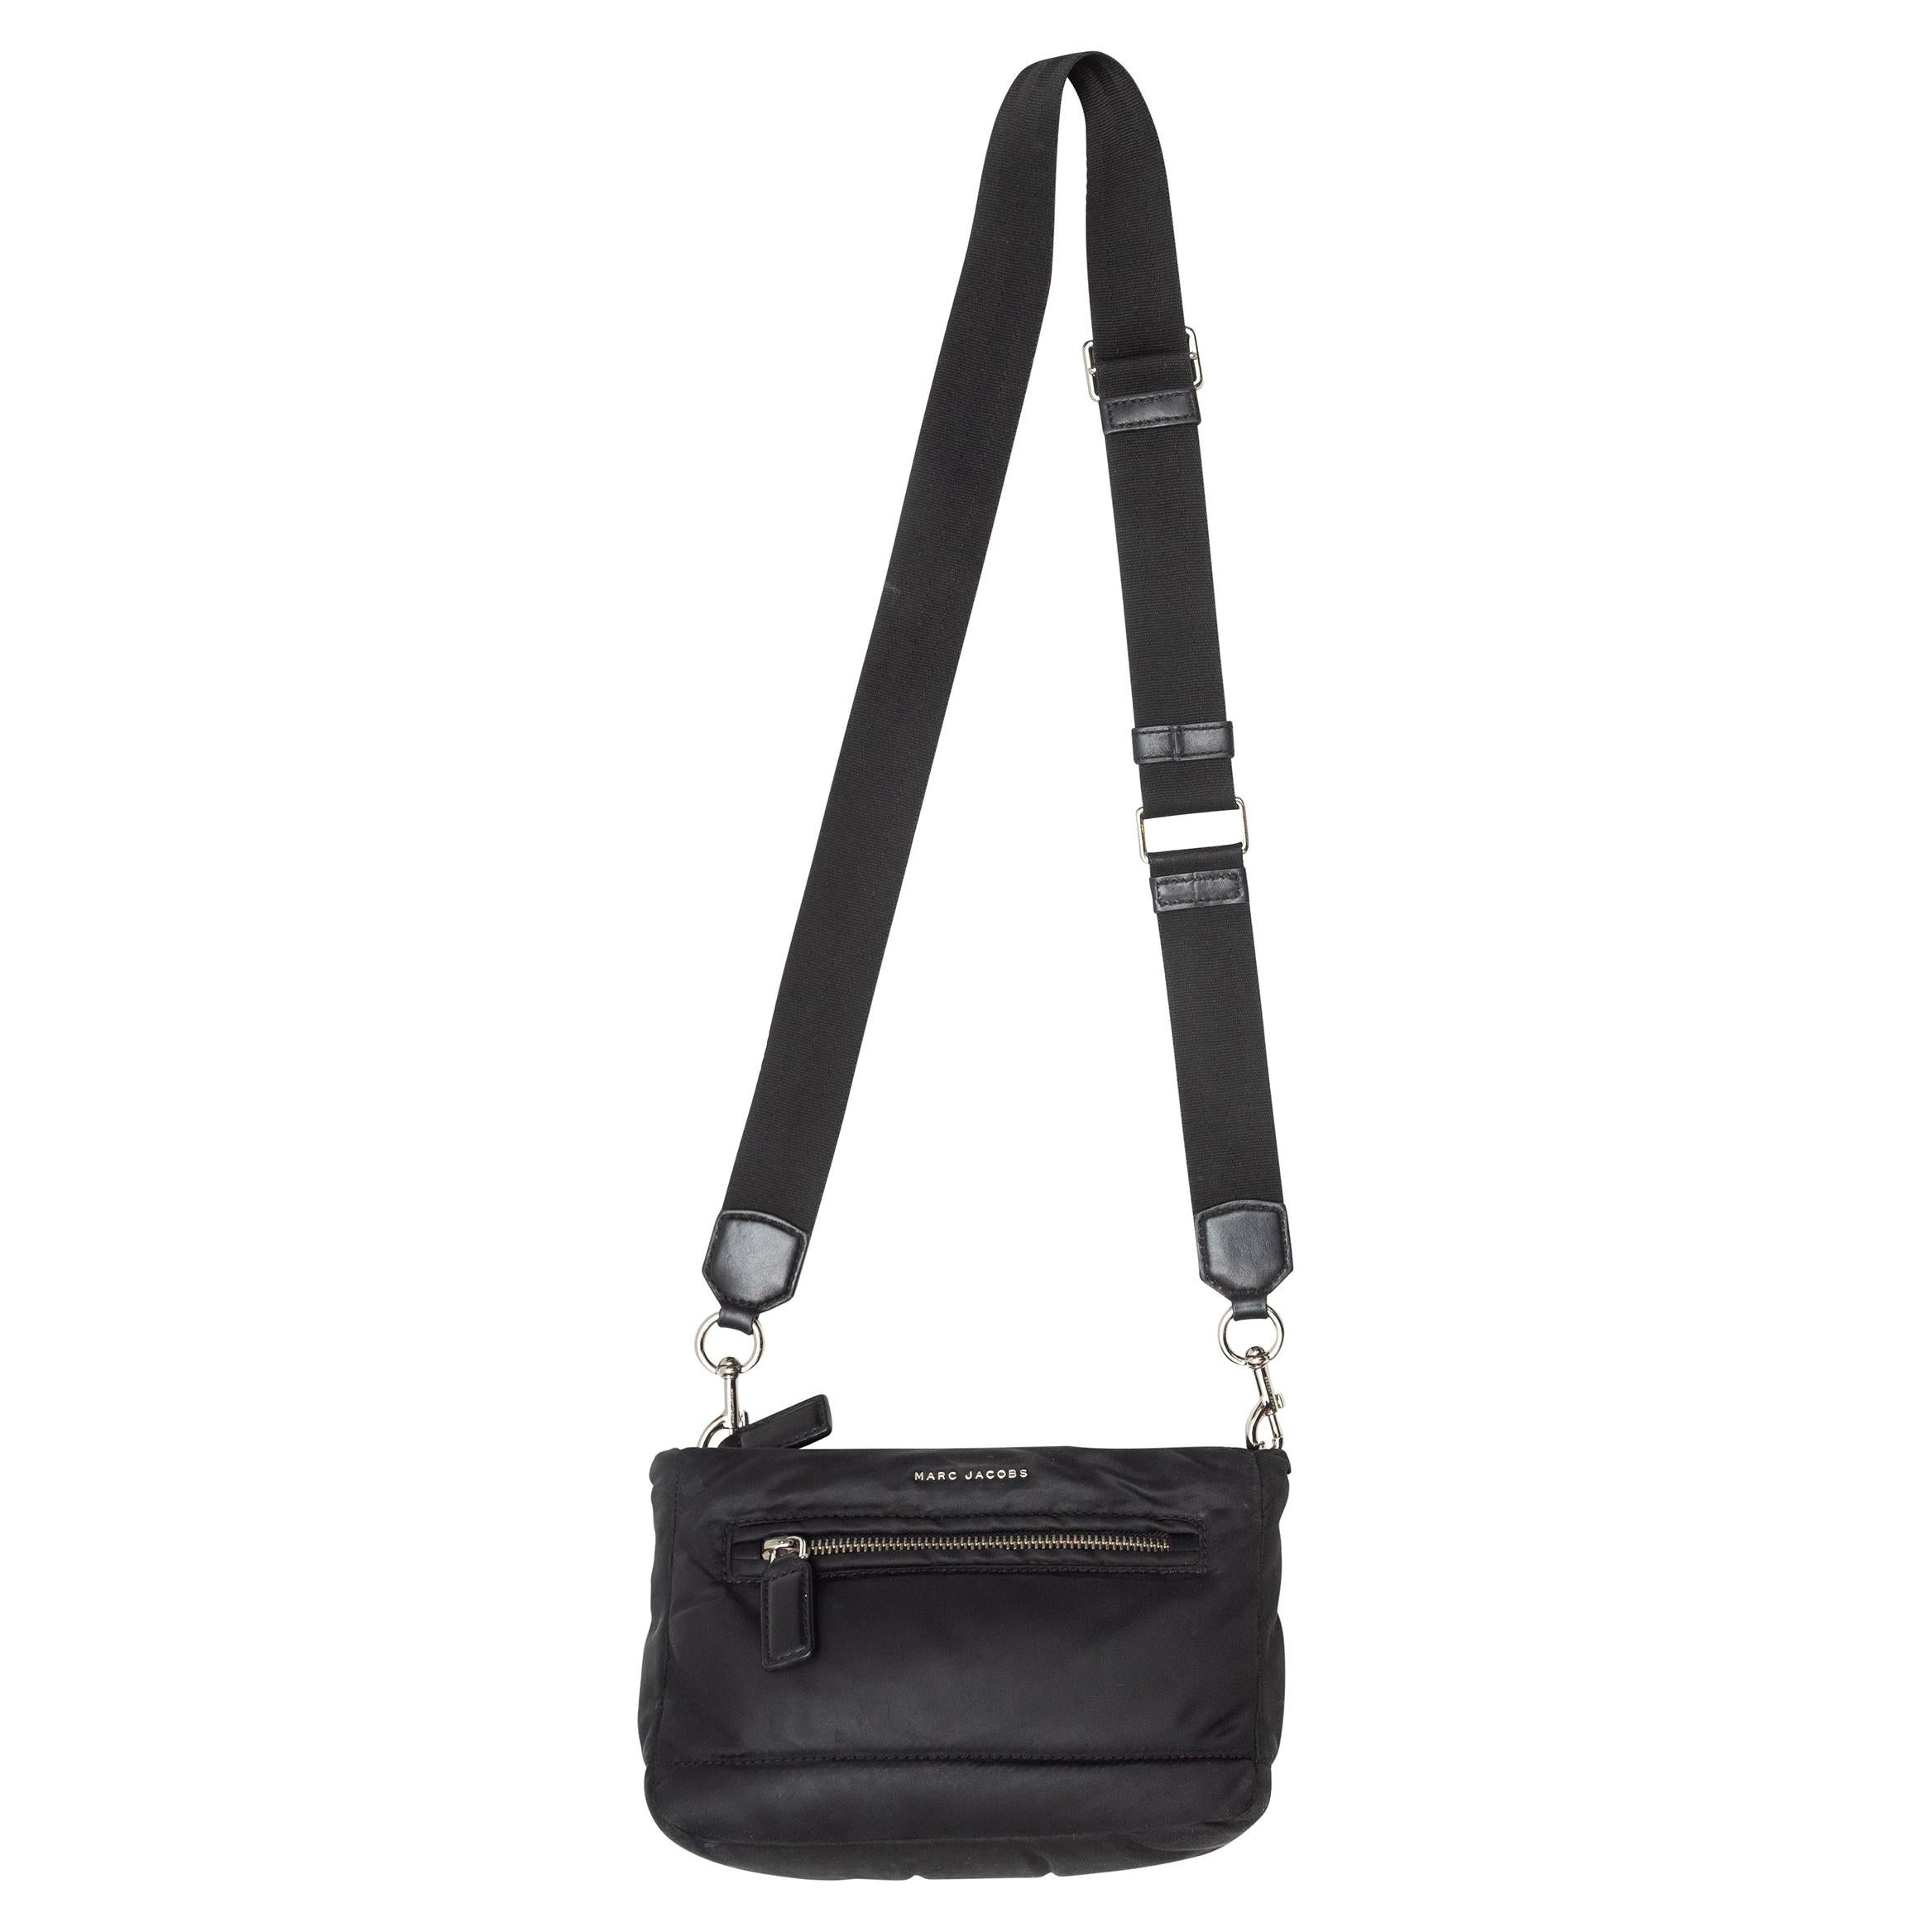 Marc by Marc Jacobs black leather crossbody bag